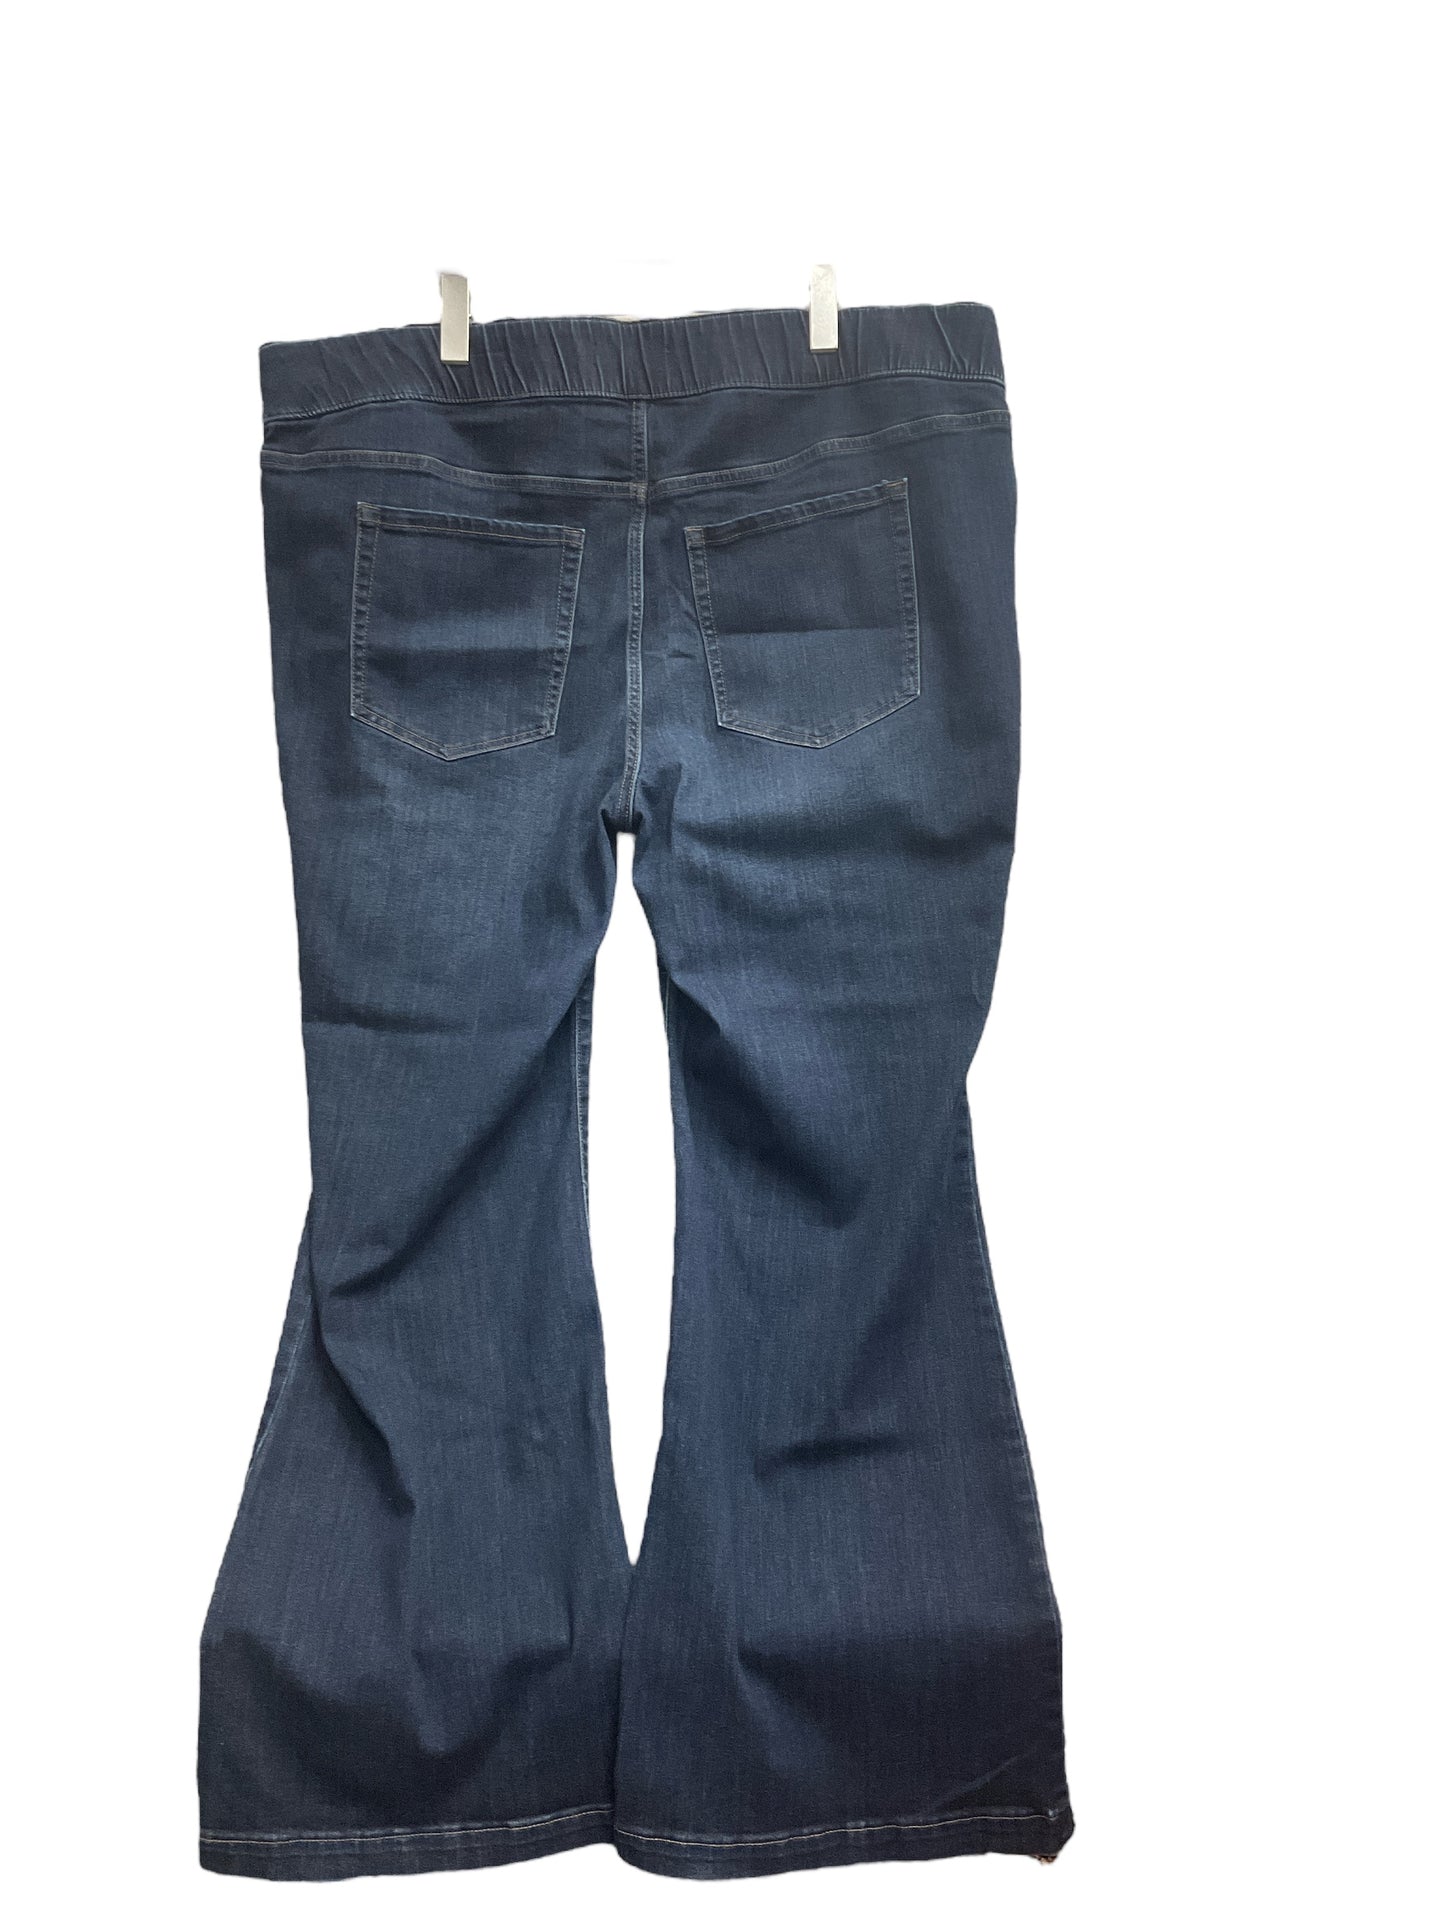 Jeans Flared By Lane Bryant  Size: 24